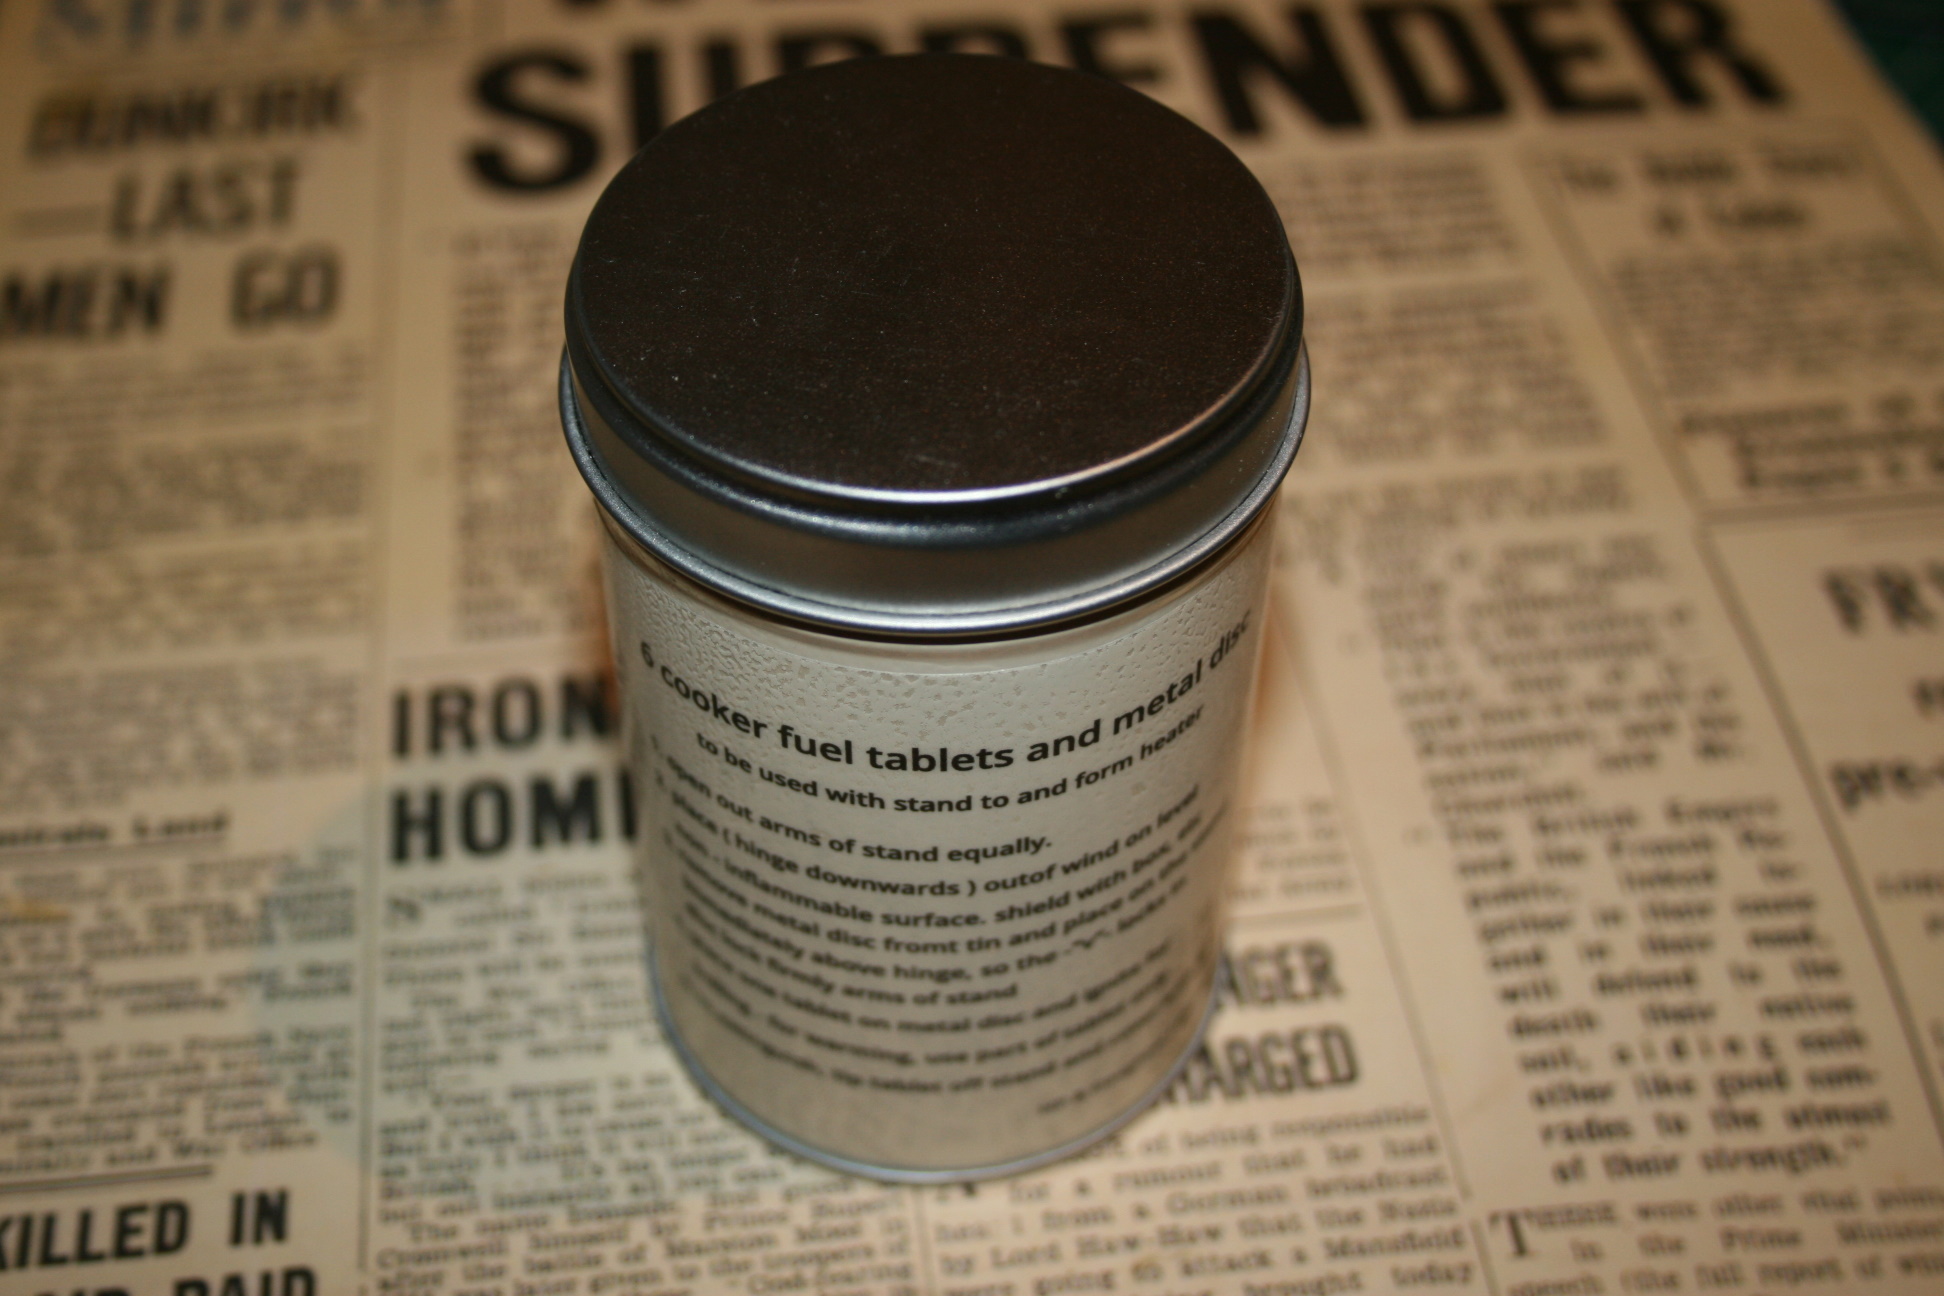 Ww2 British Army Fuel Cooker Tablet Tin with Hexamine tablets 